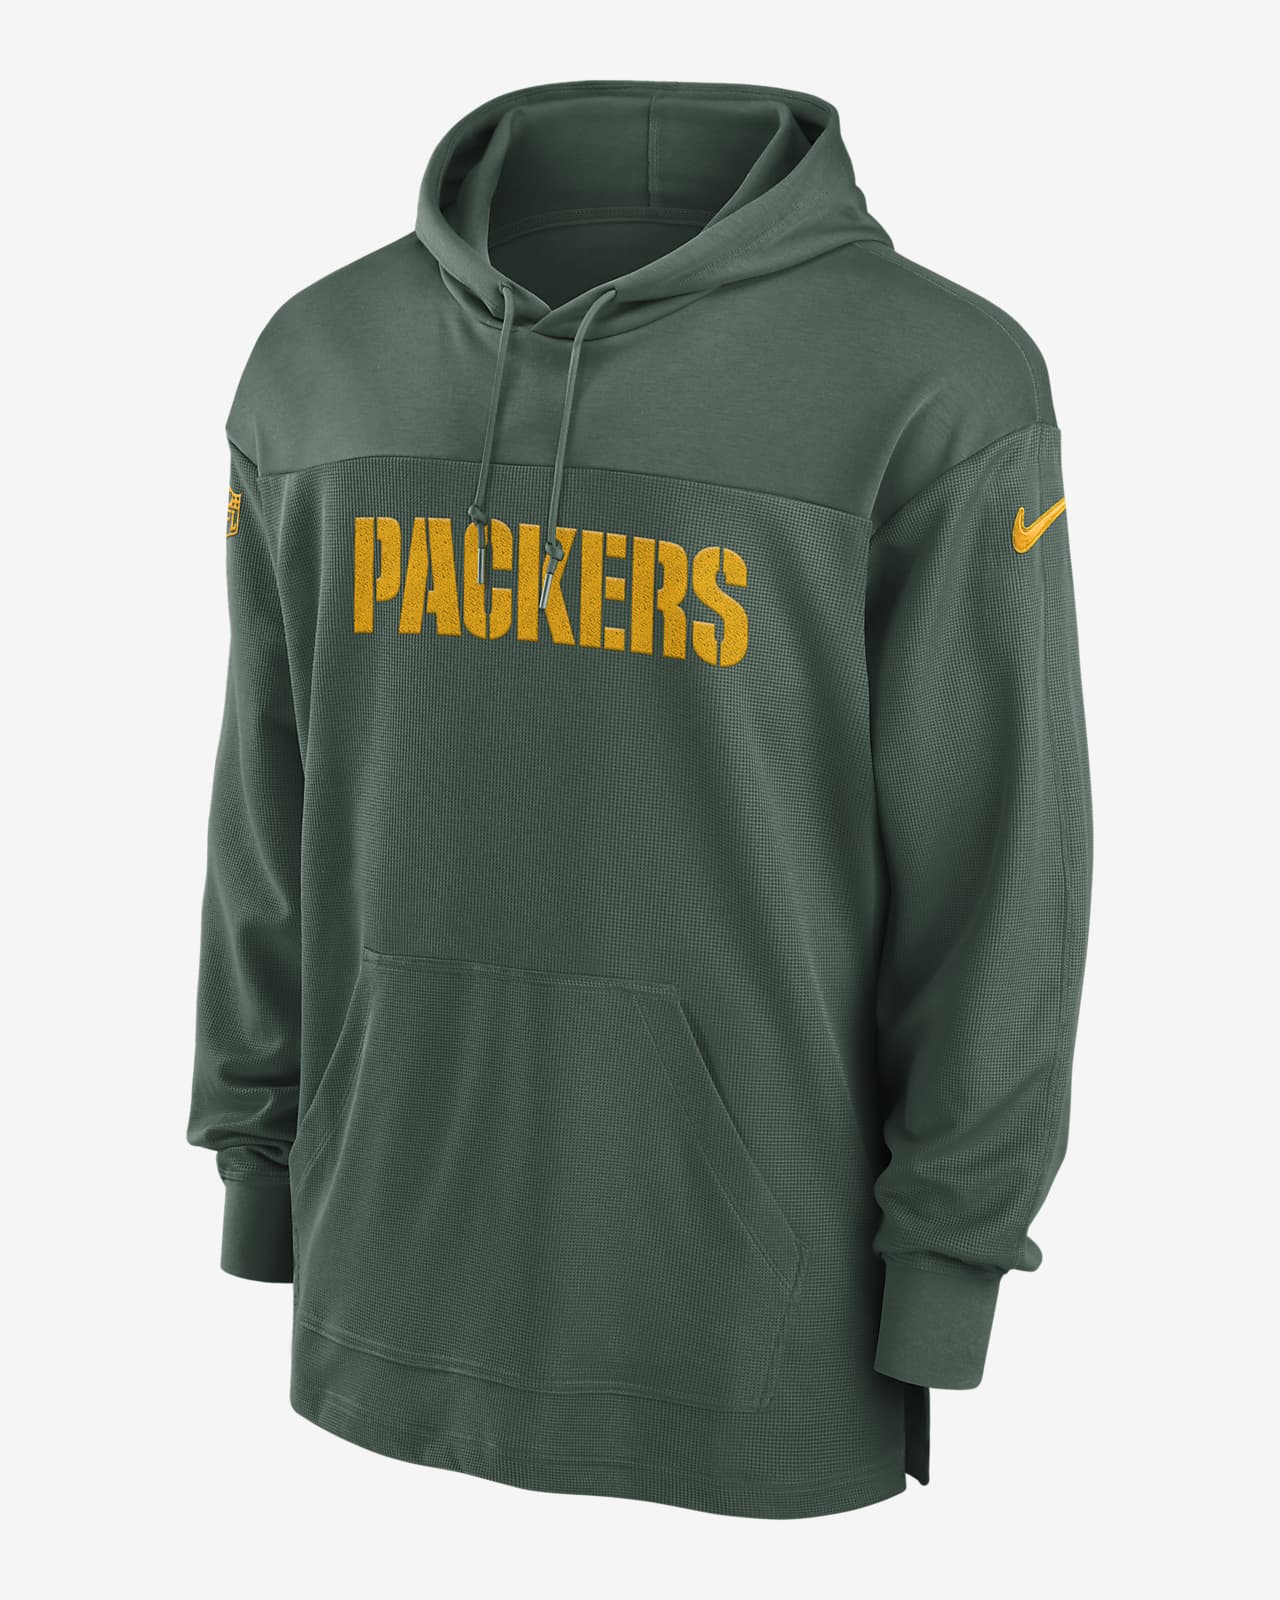 Nike NFL Green Bay Packers Long Sleeve Pullover Tee Shirt Gray